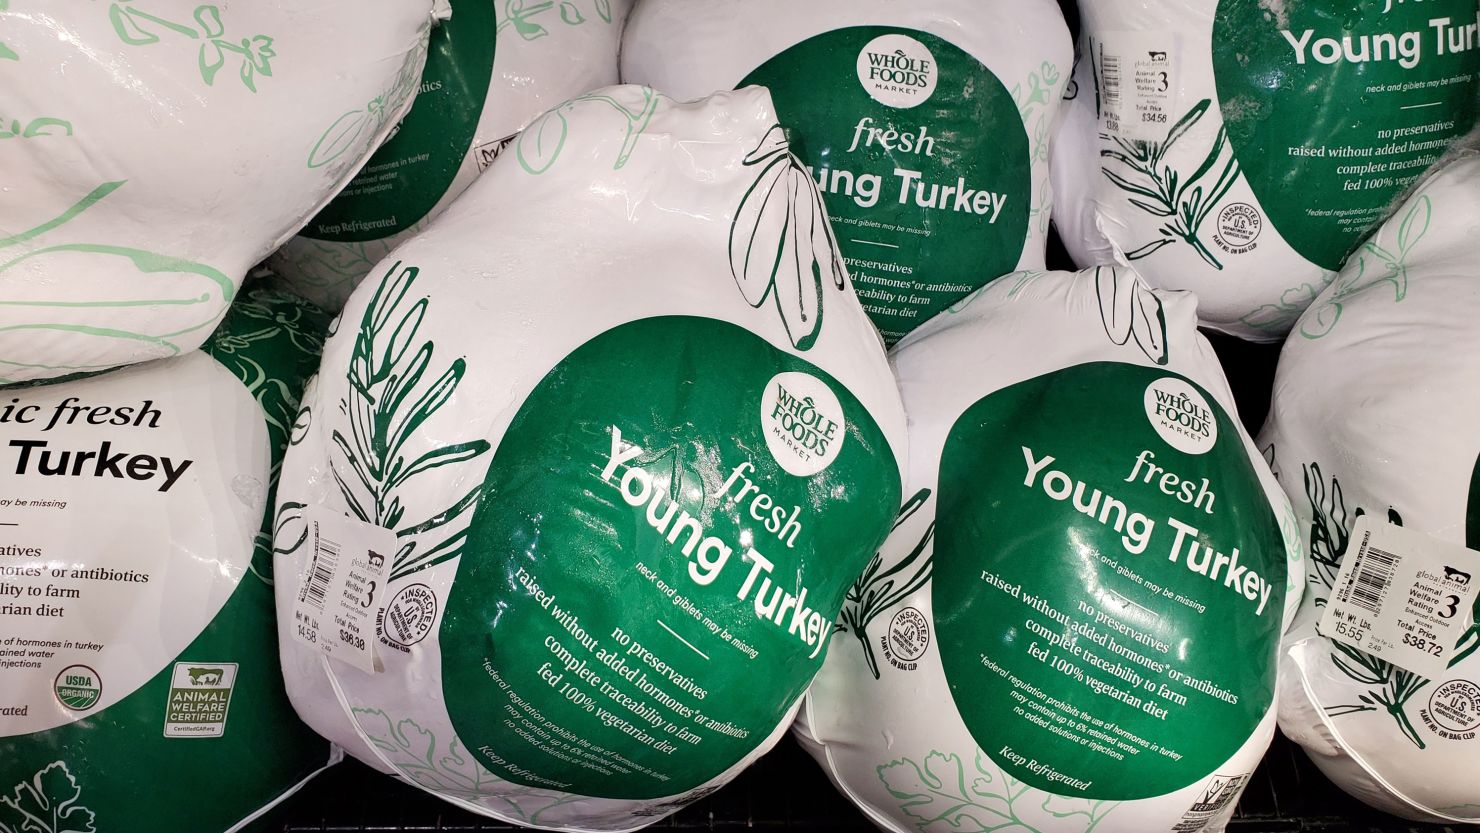 Whole Foods turkey FILE RESTRICTED